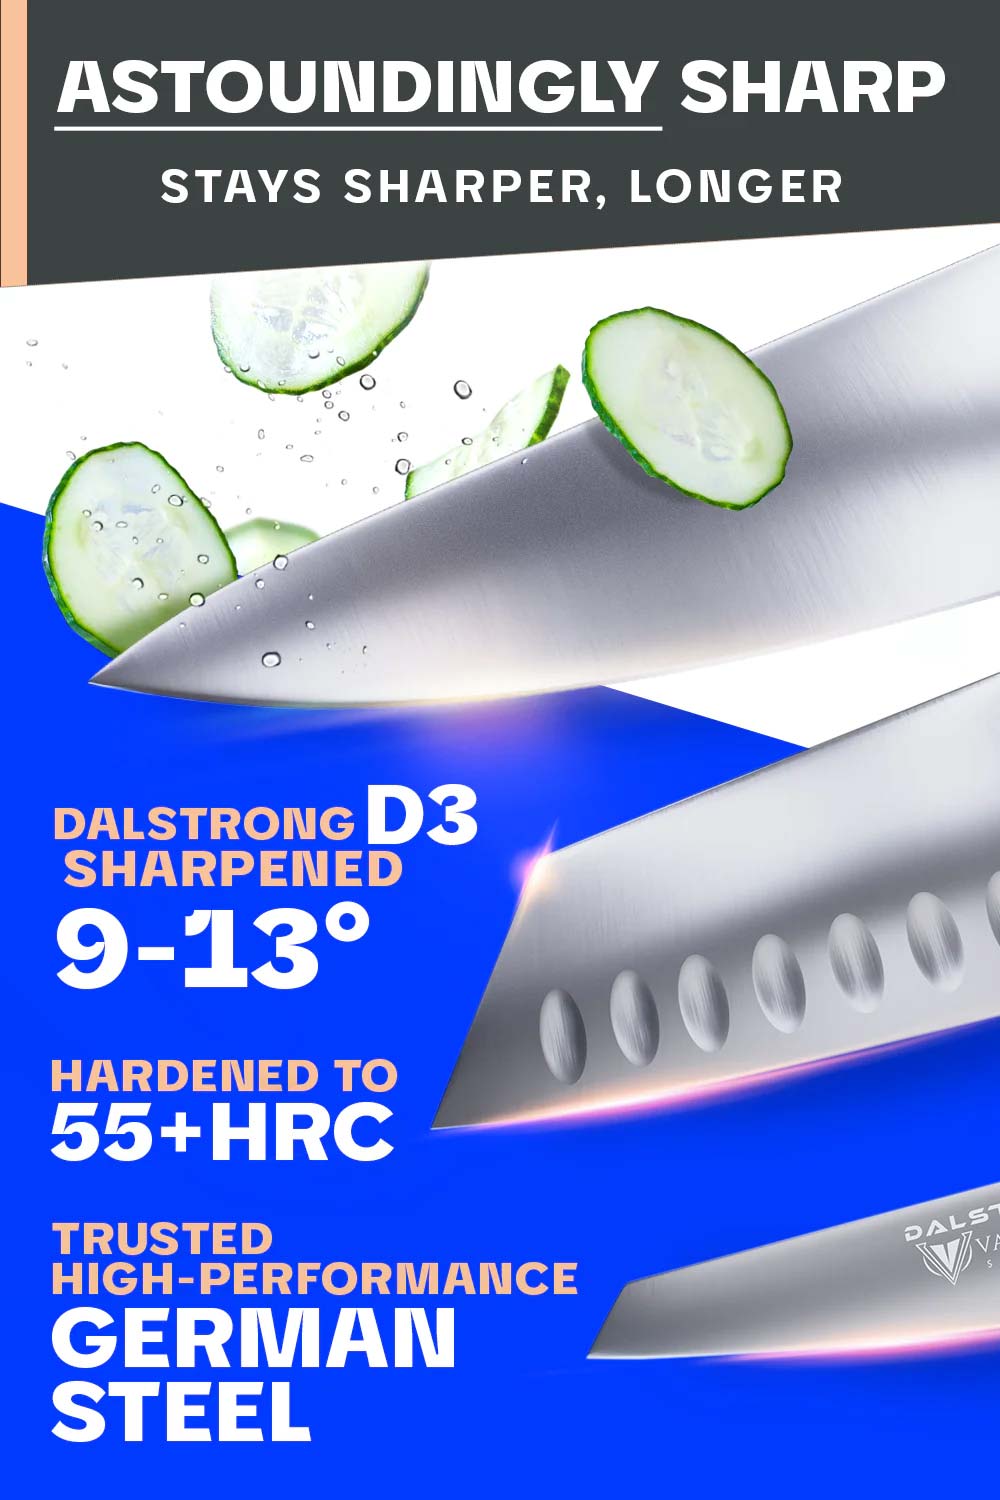 Dalstrong vanquish series 3 piece knife set with white handles featuring it's razor sharp blades.